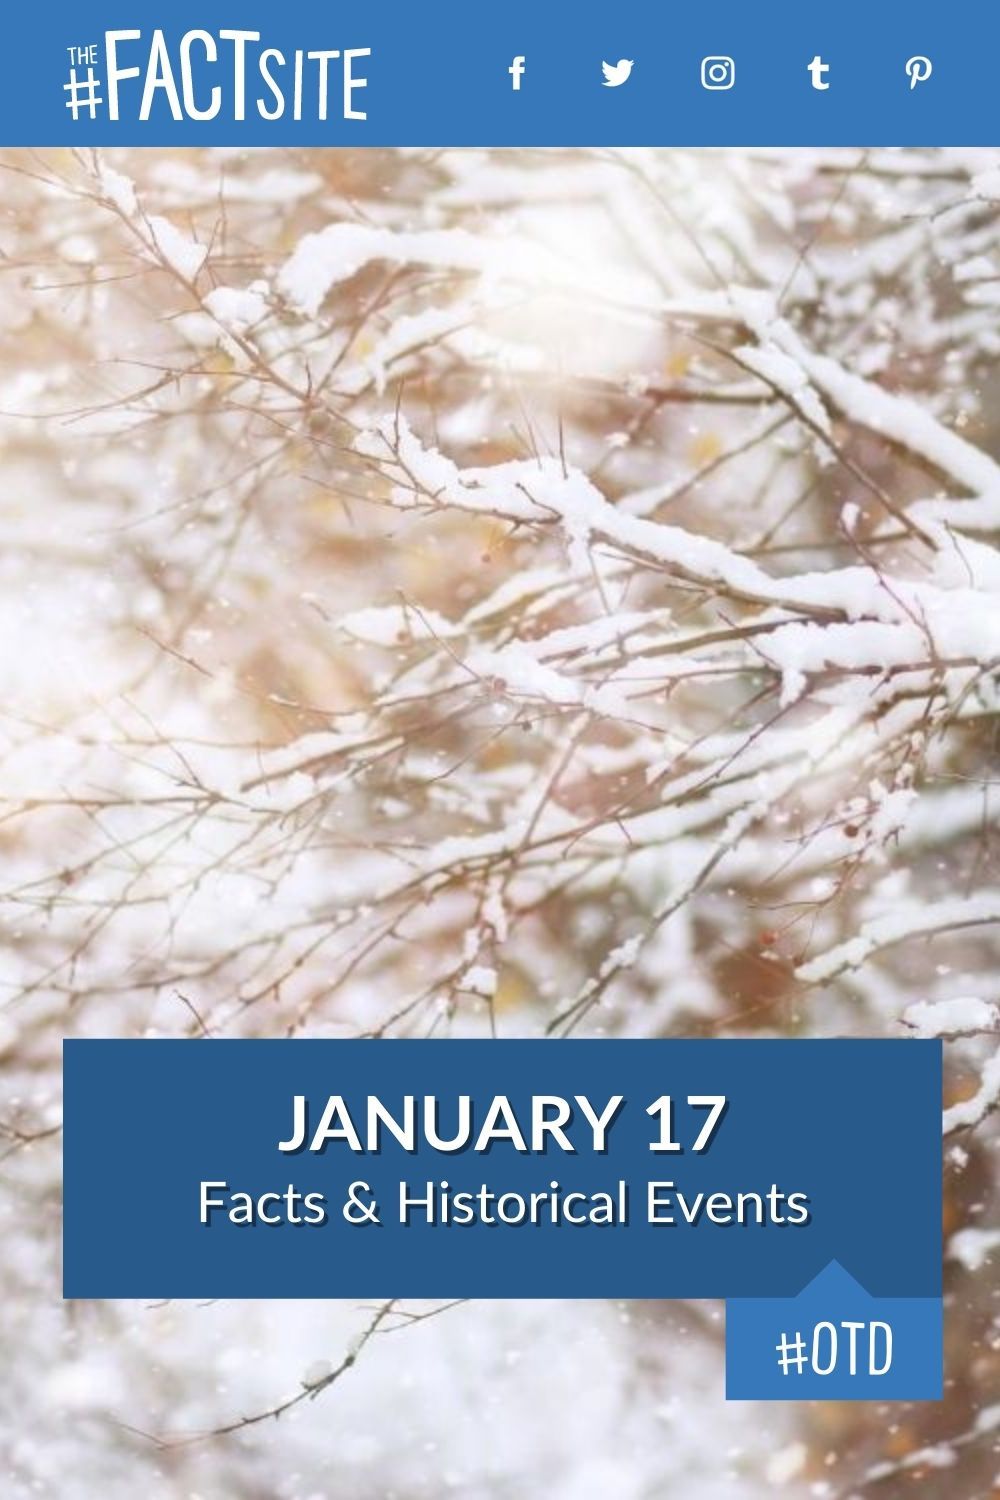 January 17: Facts & Historical Events On This Day